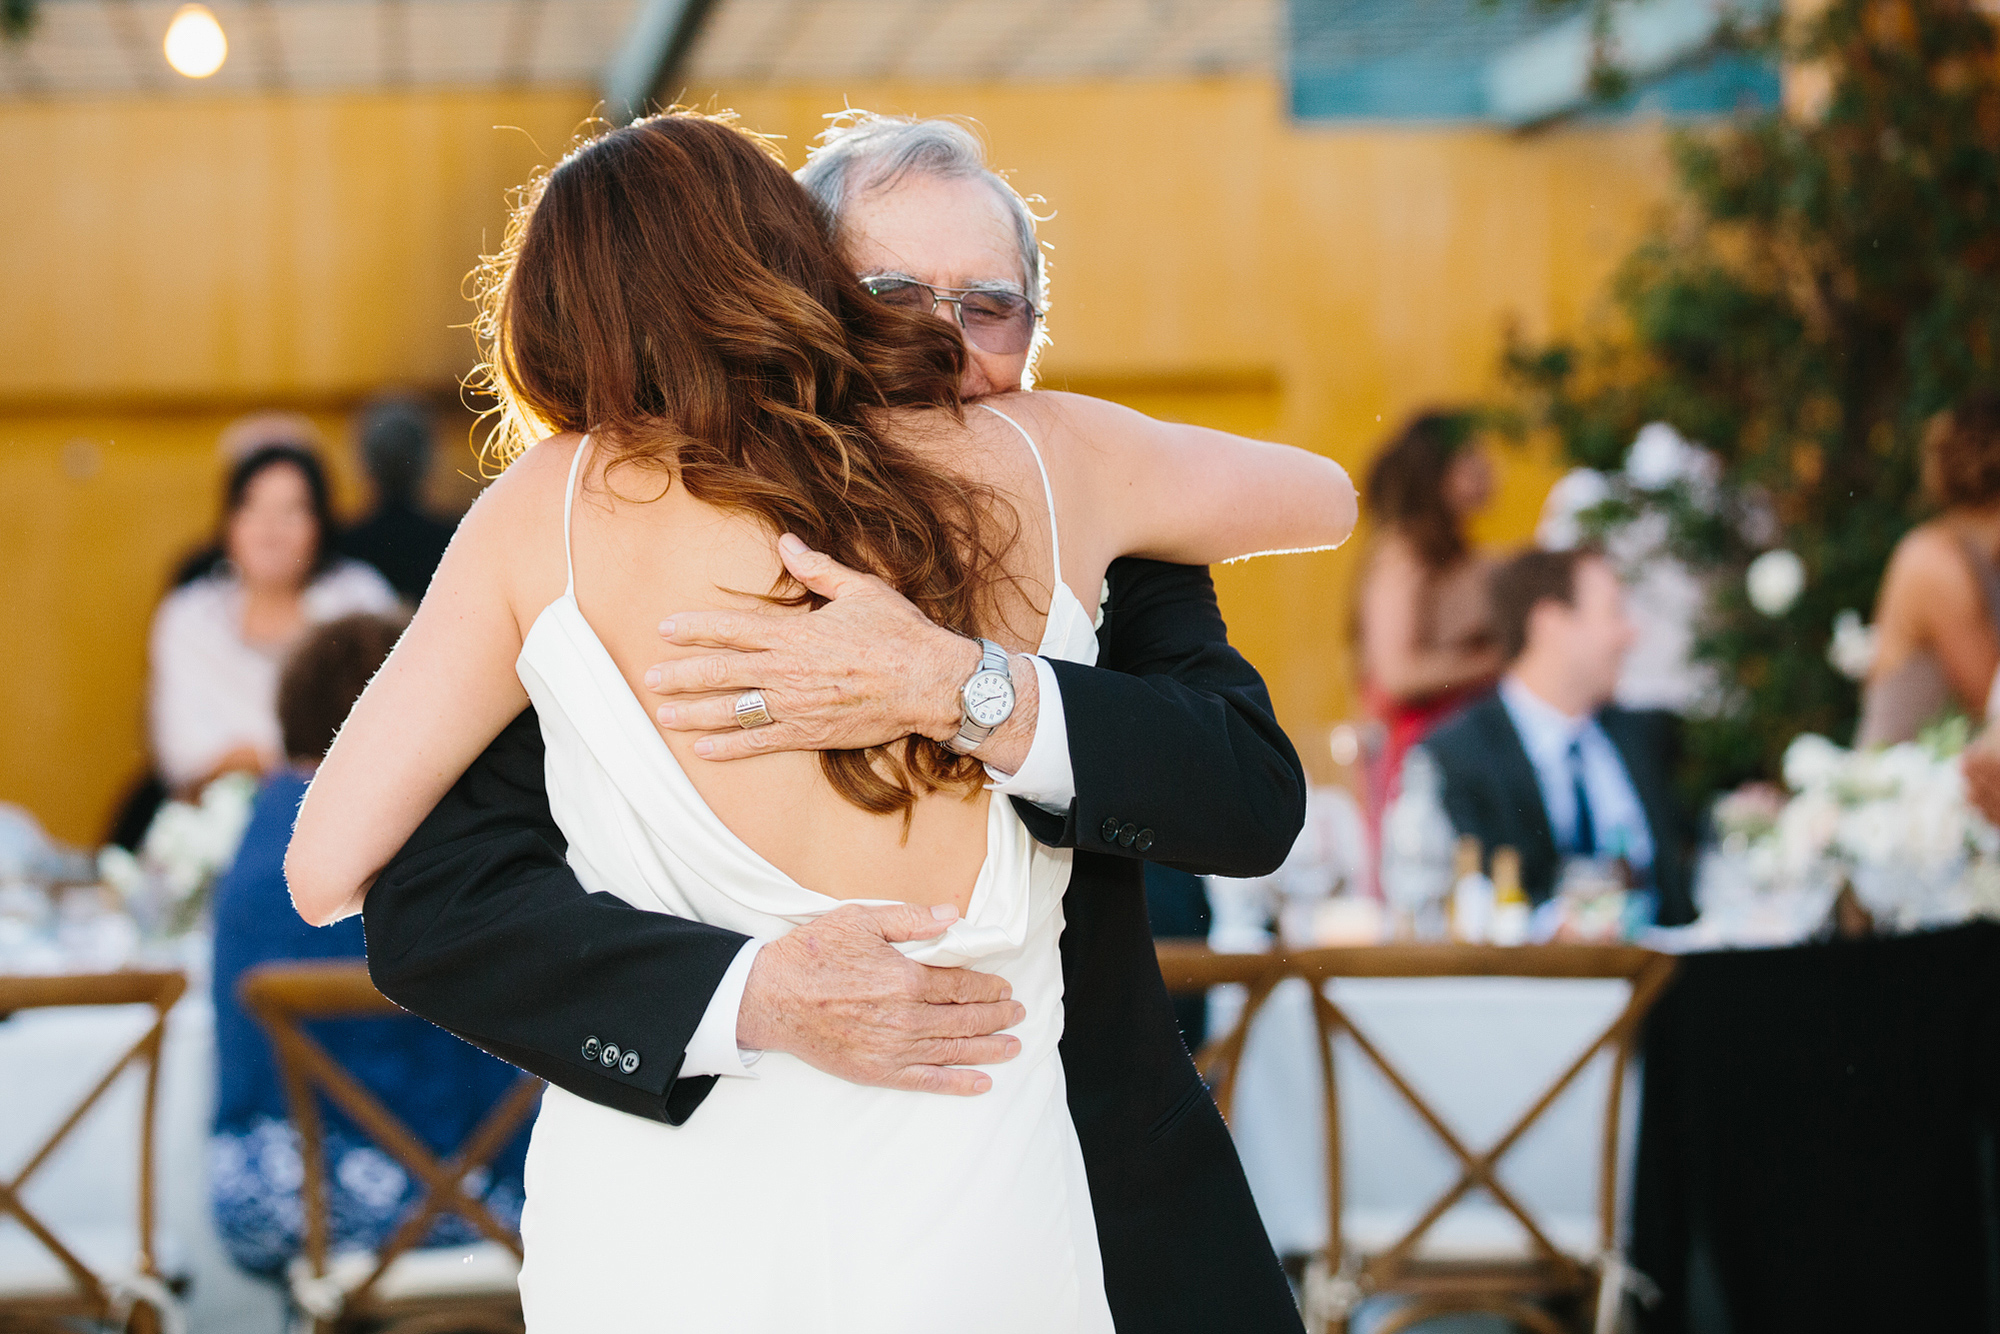 The bride hugging her dad at the end of their dance. 